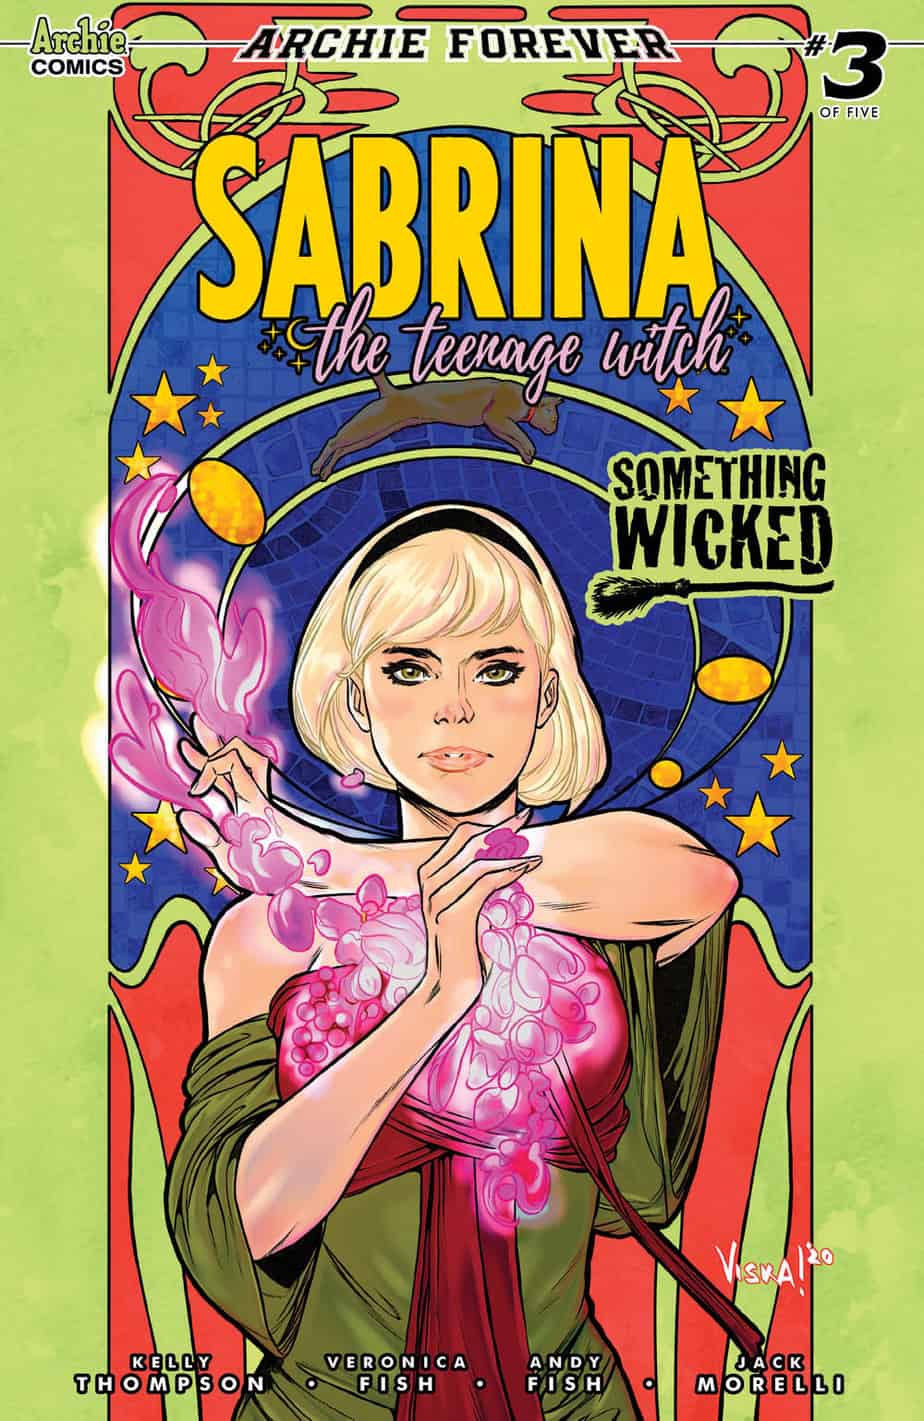 SABRINA: SOMETHING WICKED #3 - Variant Cover by Vincenzo Federici